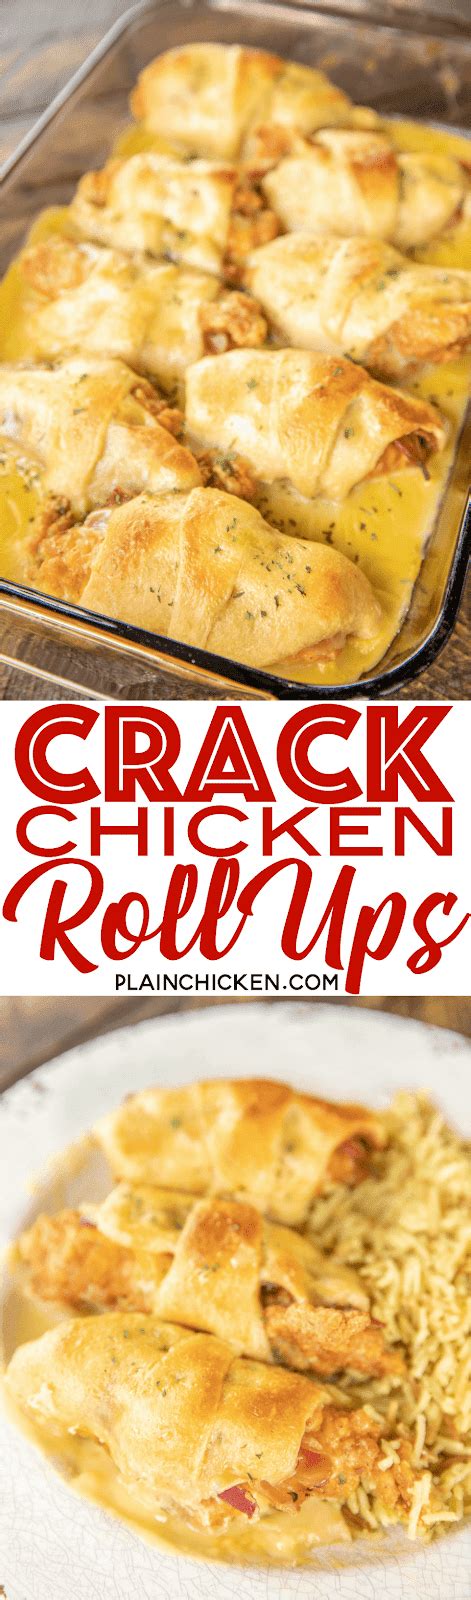 Then it's baked for 15 minutes to continue cooking the chicken, and also then simply sit back and let the compliments roll in. Crack Chicken Roll Ups | Plain Chicken®